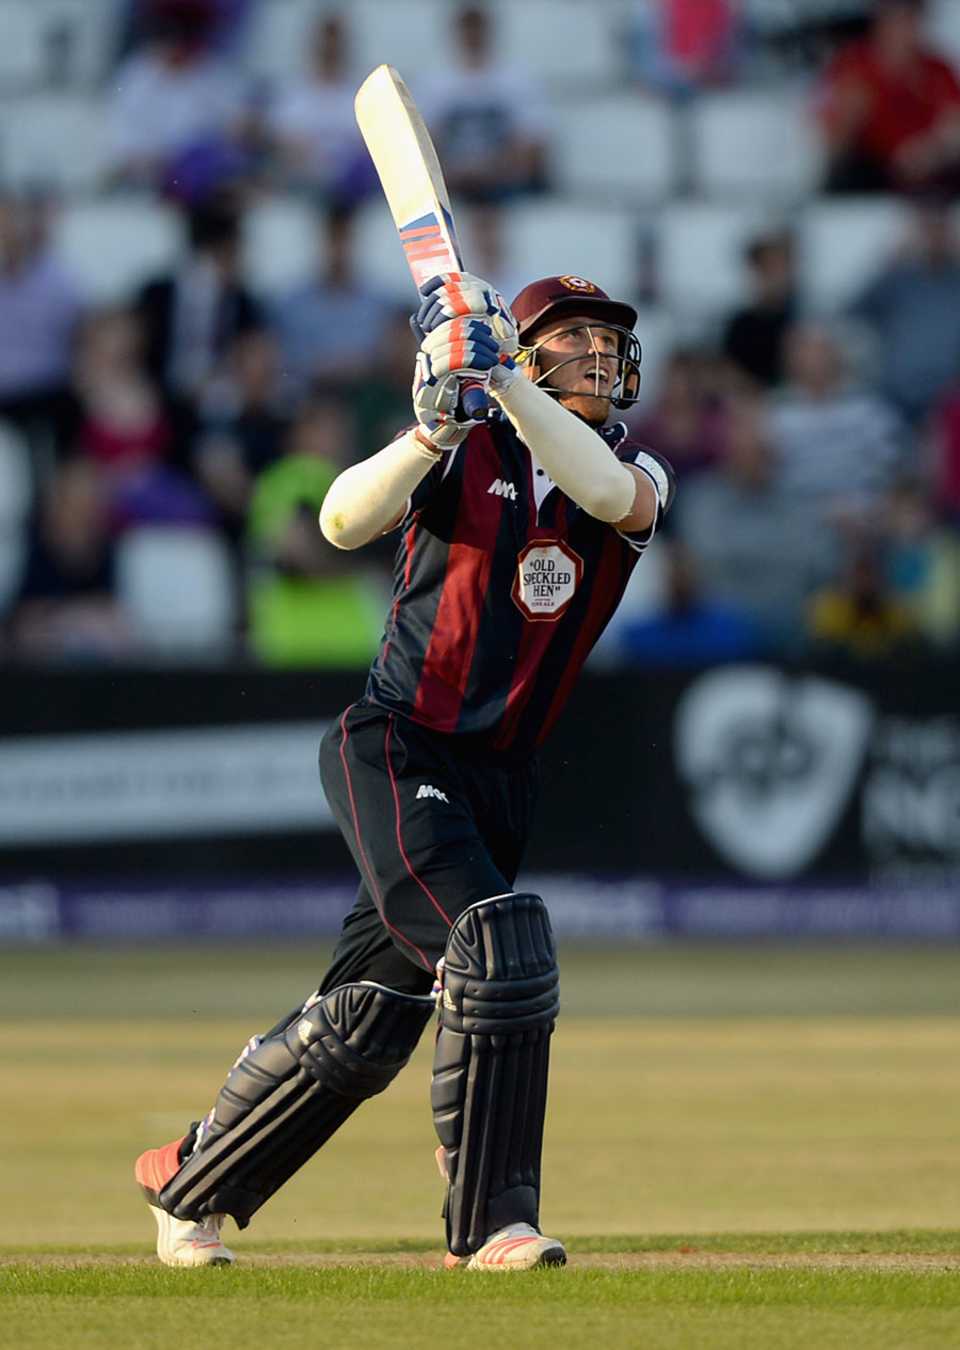 David Willey clubbed 60 off 27 balls